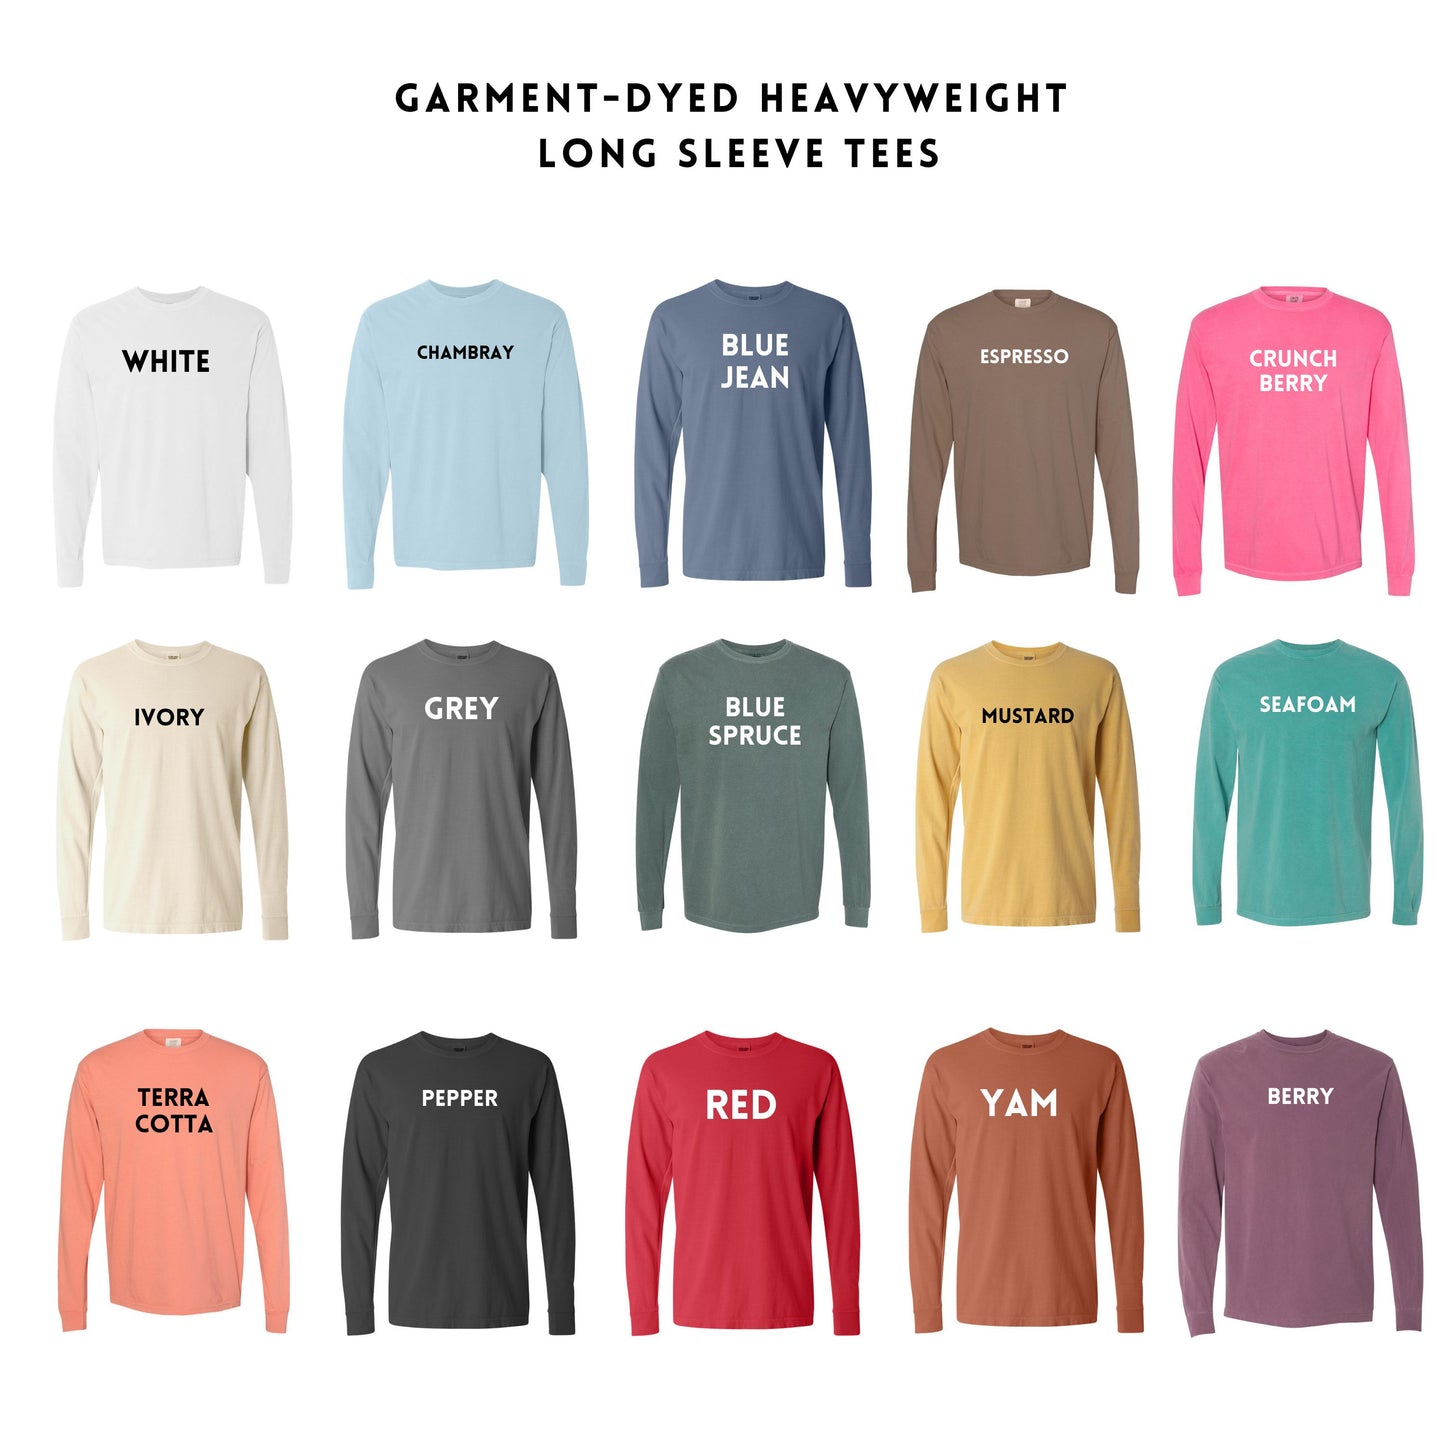 Distracted By Chickens | Garment Dyed Long Sleeve